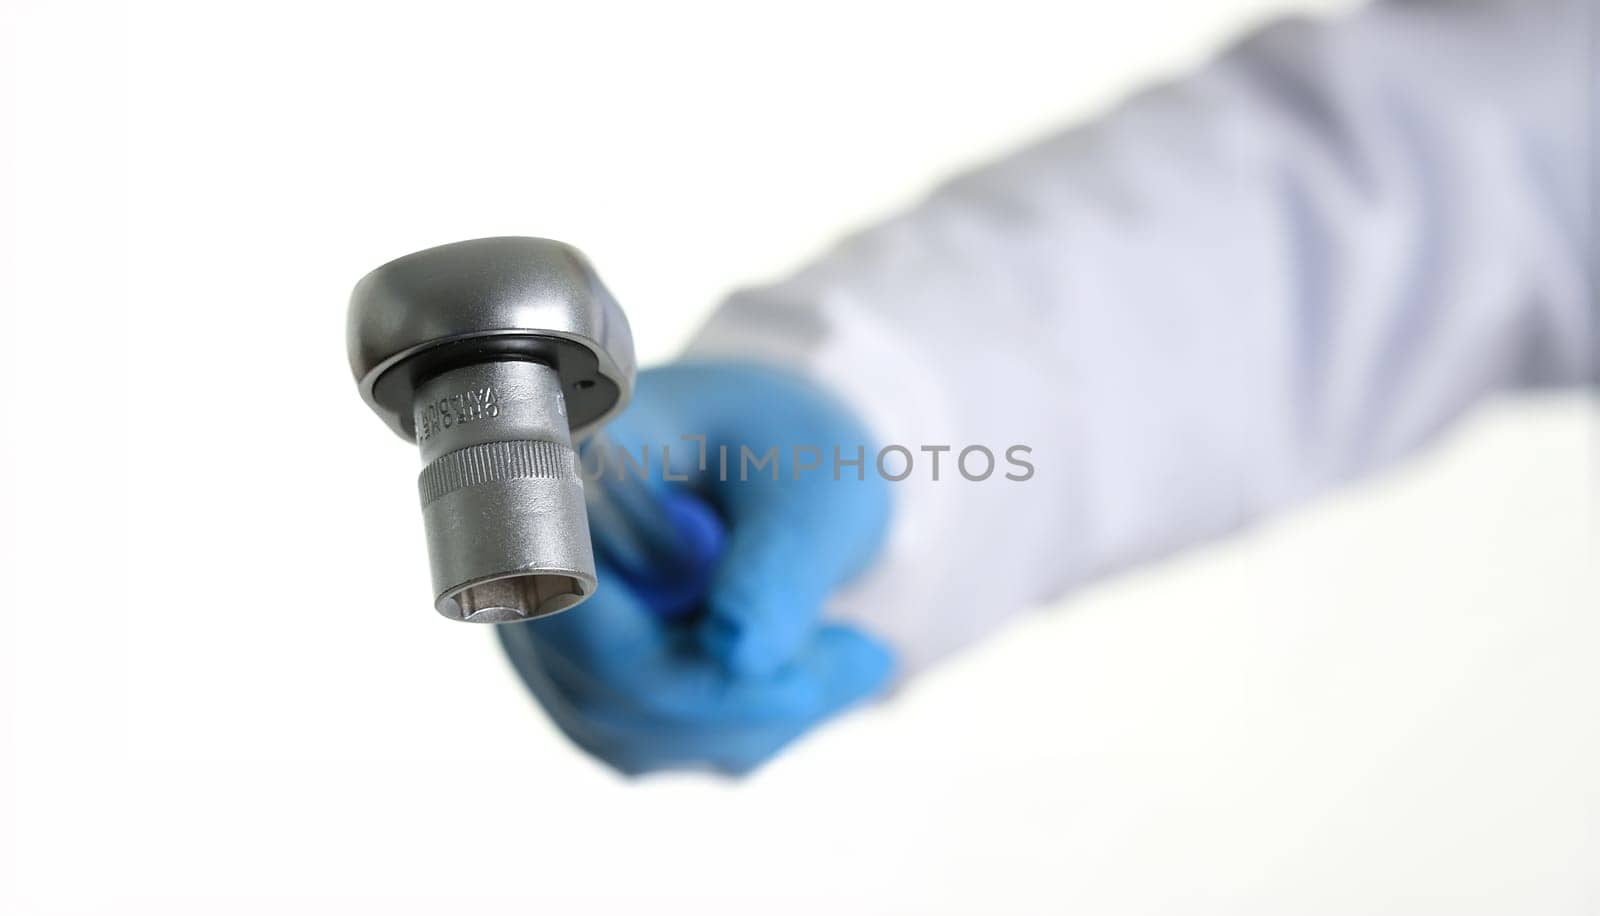 The key for the car repair man holding in his hand. Isolated on white.